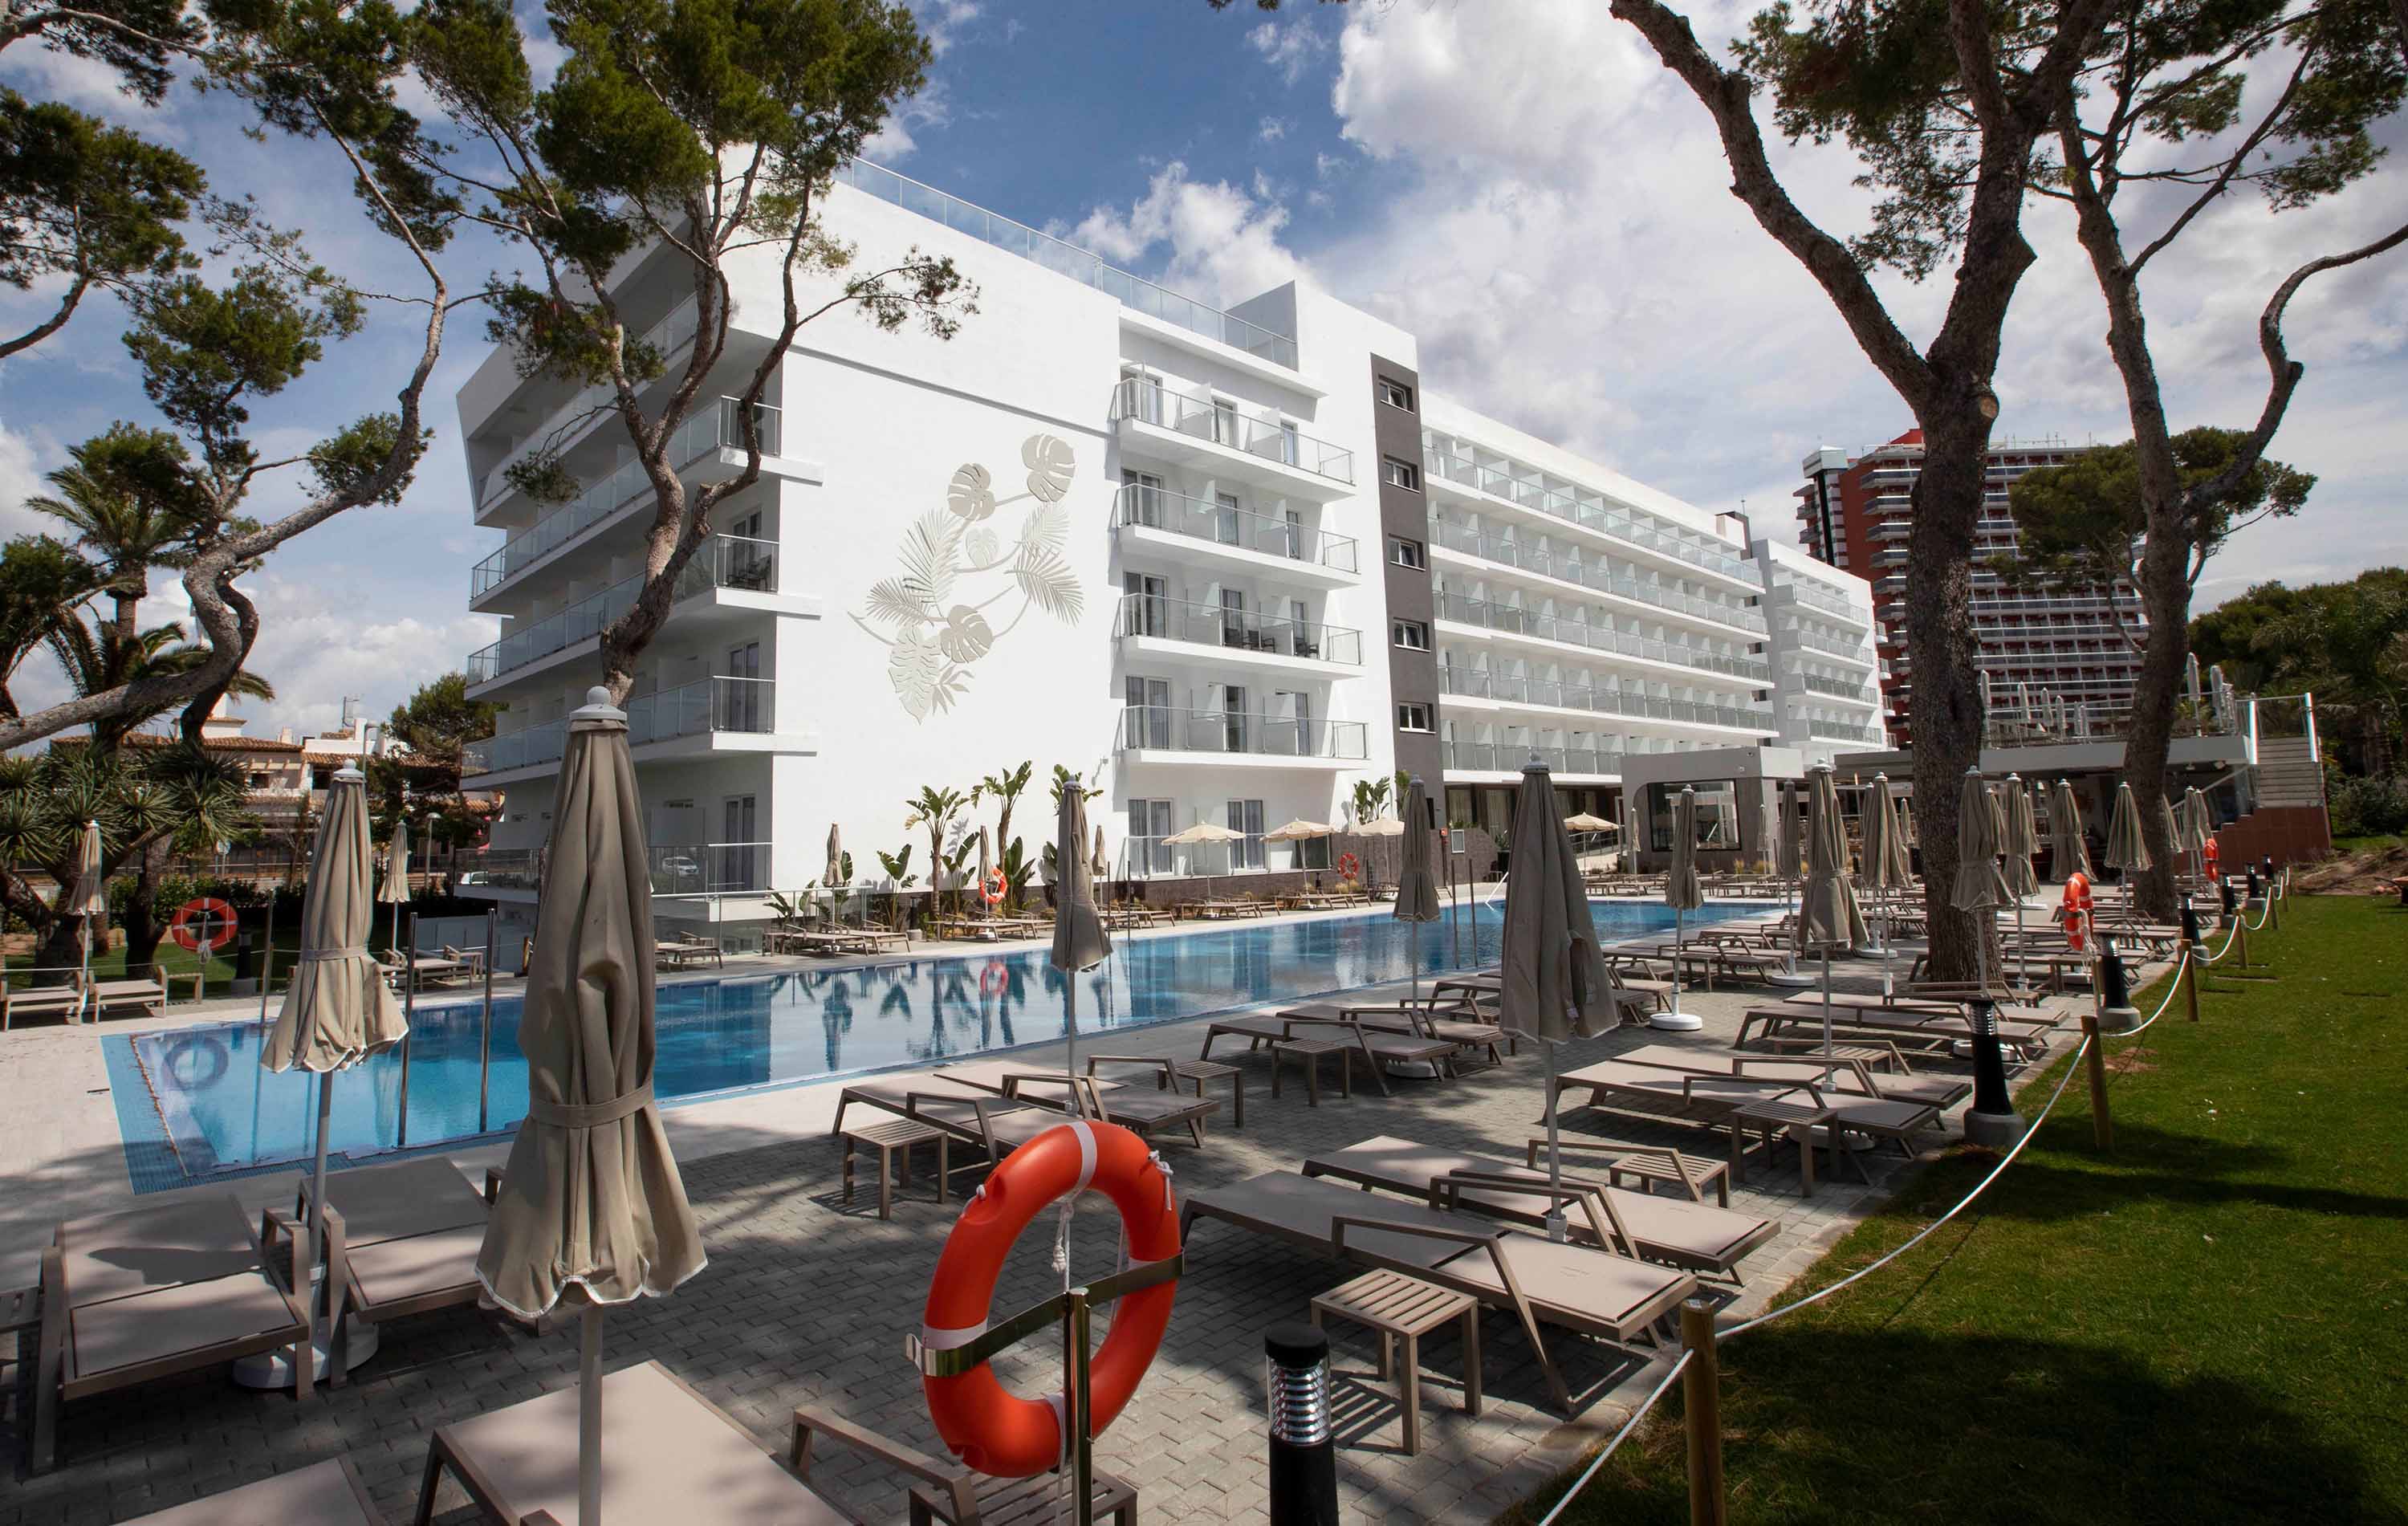 A general view shows the RIU Concordia Hotel in Palma de Mallorca, Spain, on June 10, as the Balearic Islands prepare to welcome tourists from parts of the European Union beginning on June 15.